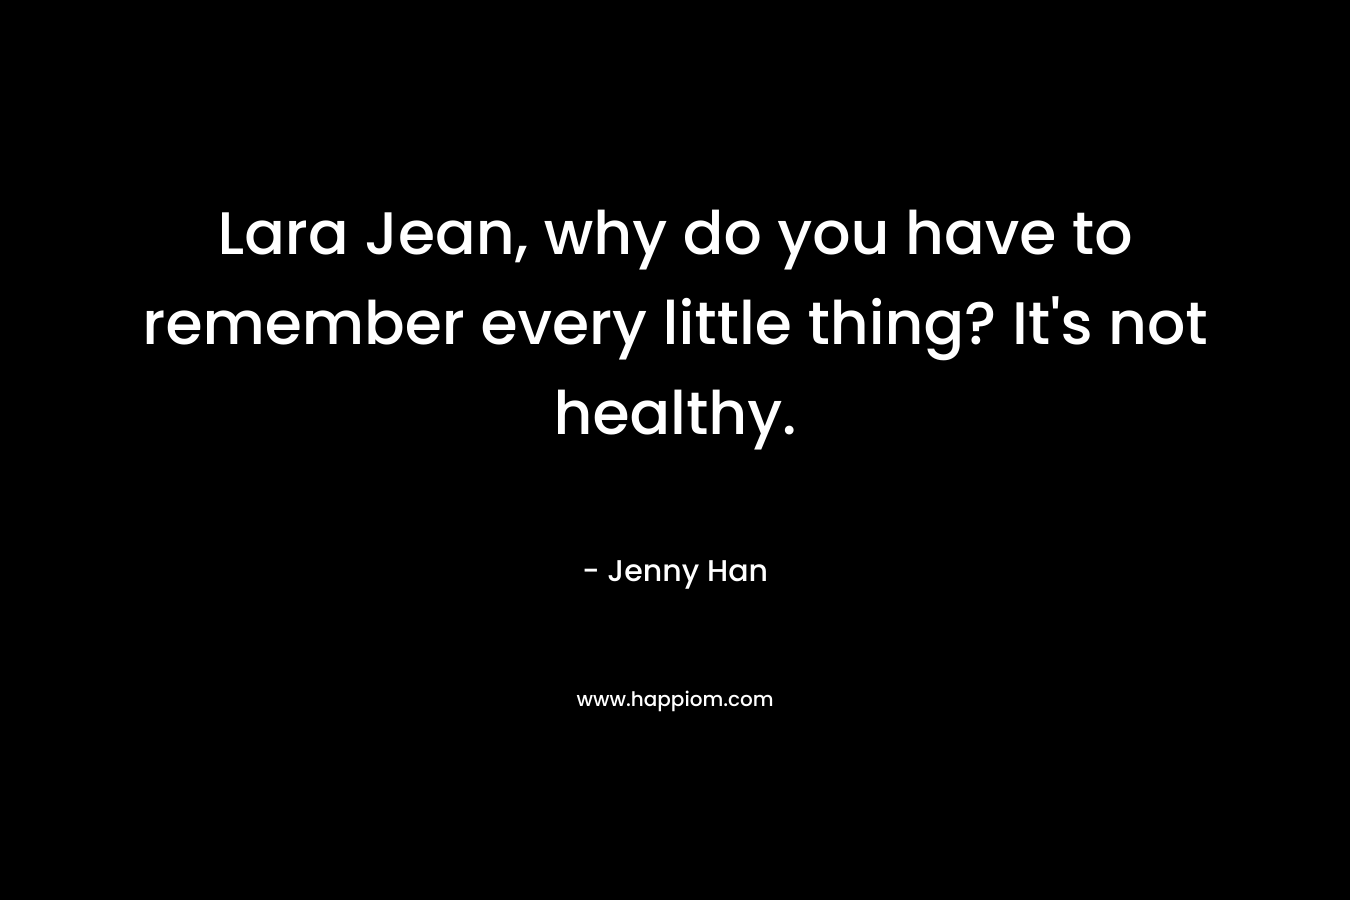 Lara Jean, why do you have to remember every little thing? It’s not healthy. – Jenny Han